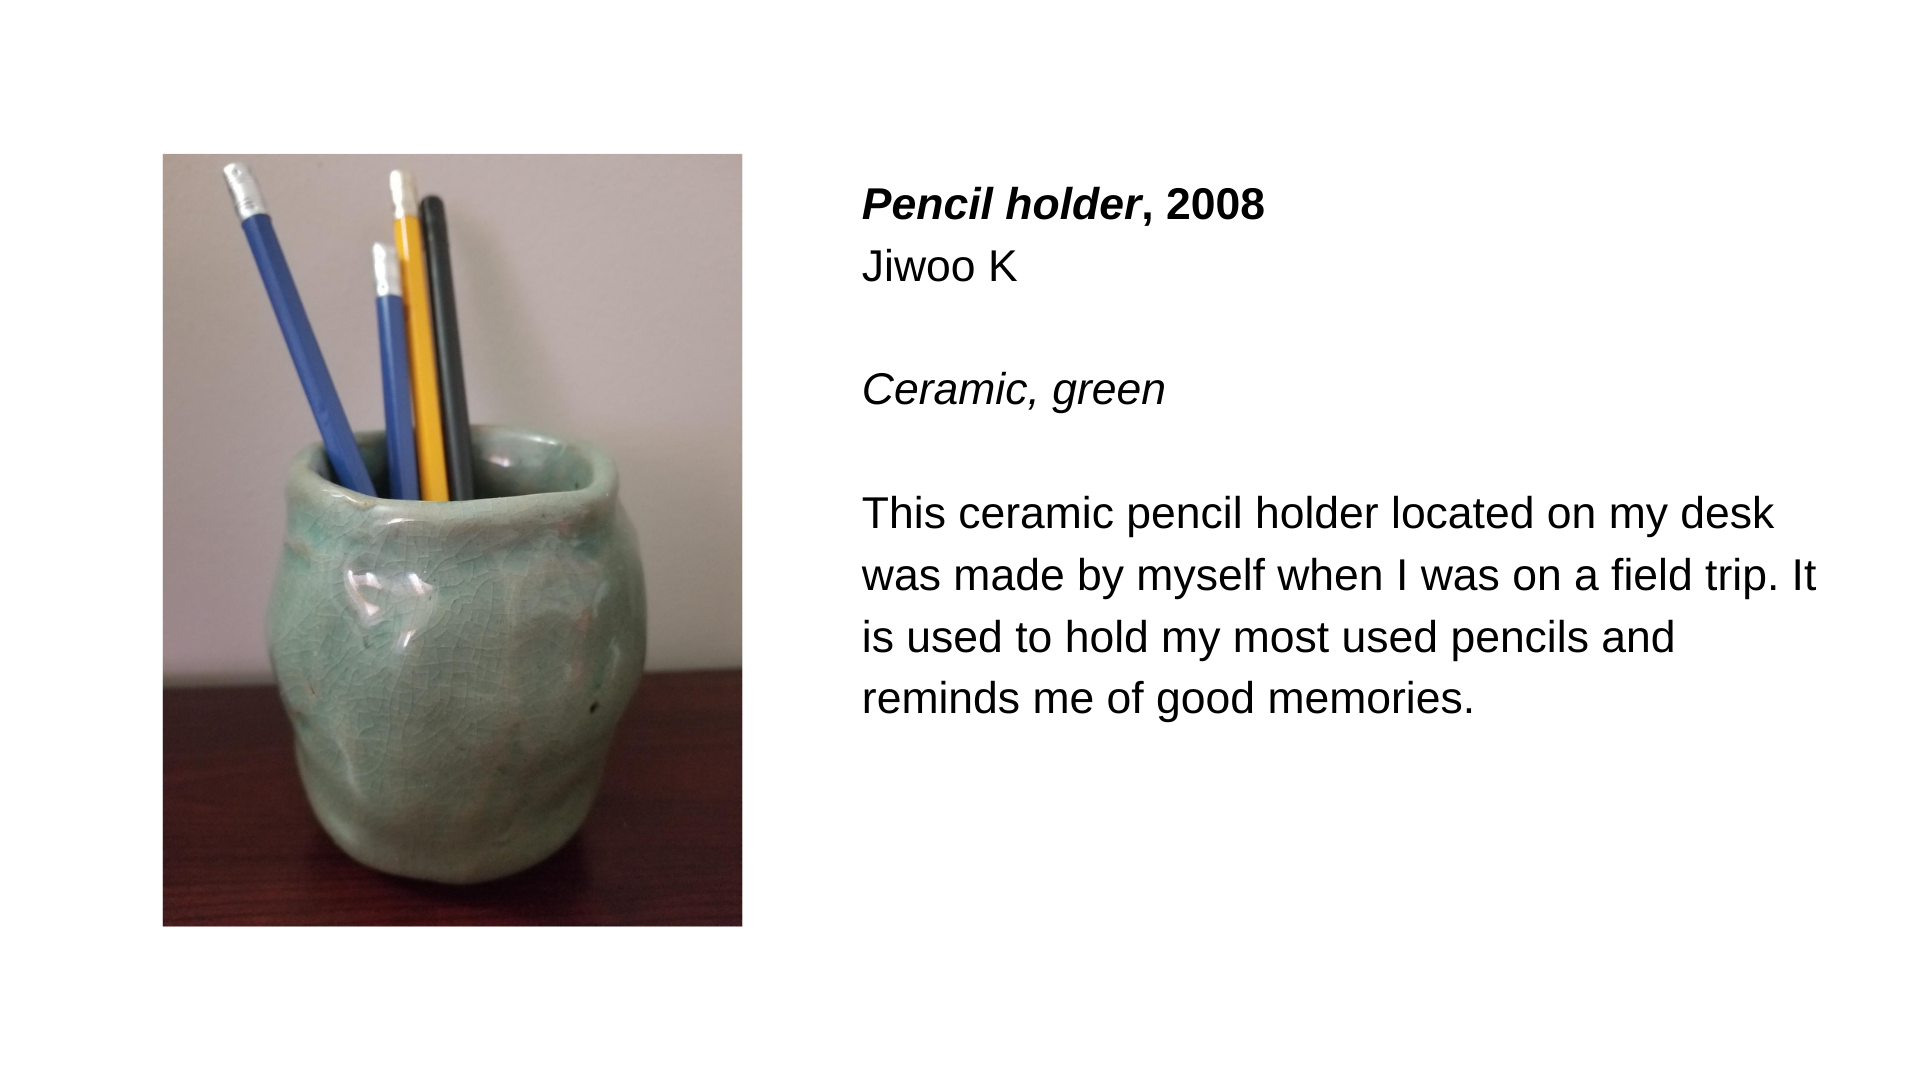  A green ceramic vessel with pencils in it. Next to this image is the text, “Pencil Holder, 2008 - Jiwoo K. Ceramic, green. This ceramic pencil holder located on my desk was made by myself when I was on a field trip. It is used to hold my most used p